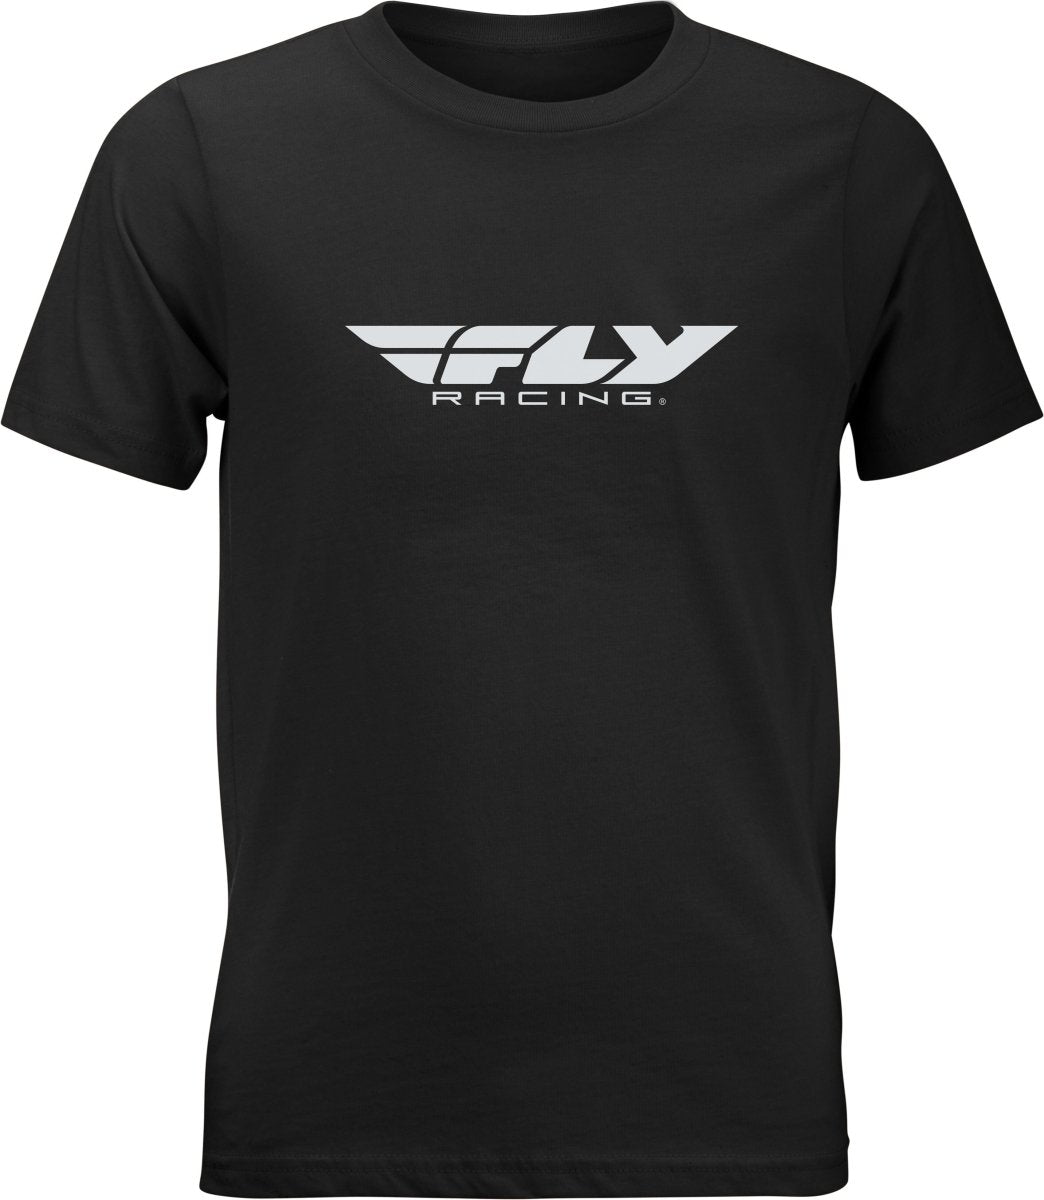 FLY RACING - YOUTH CORPORATE TEE - 352-0664YS - 191361242533